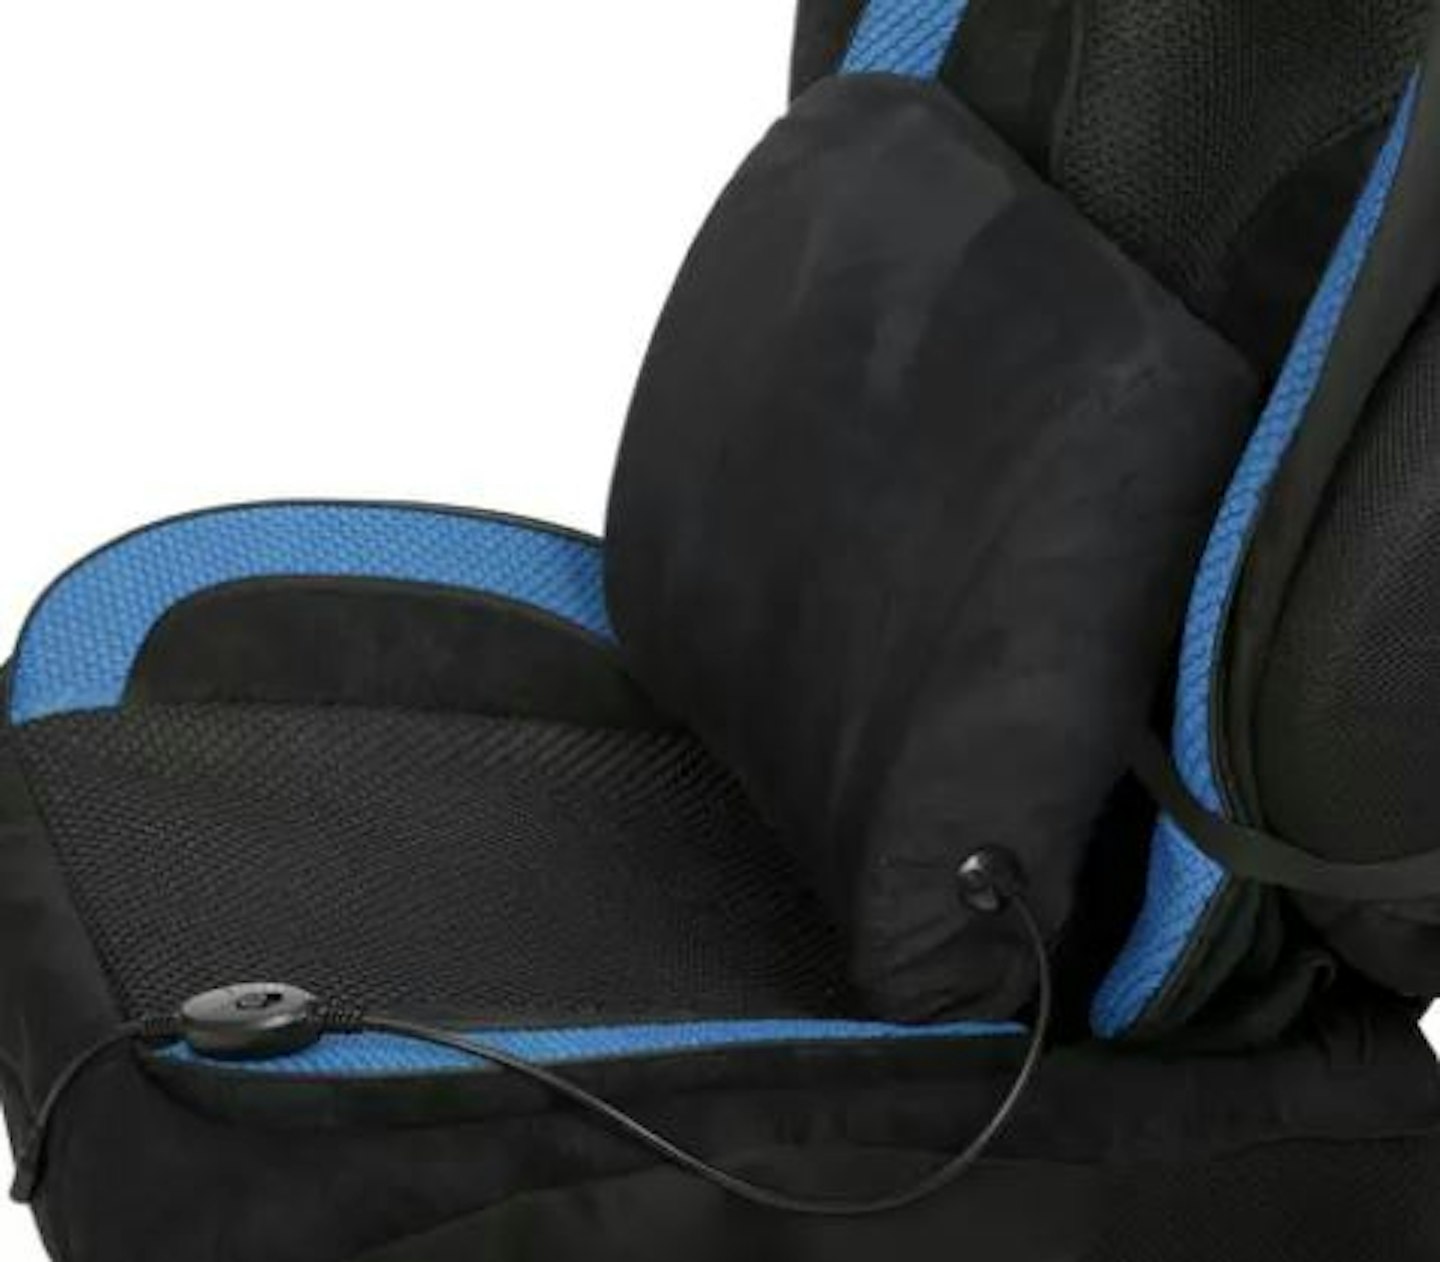 CAR's Recommended Heated Car Seat Covers